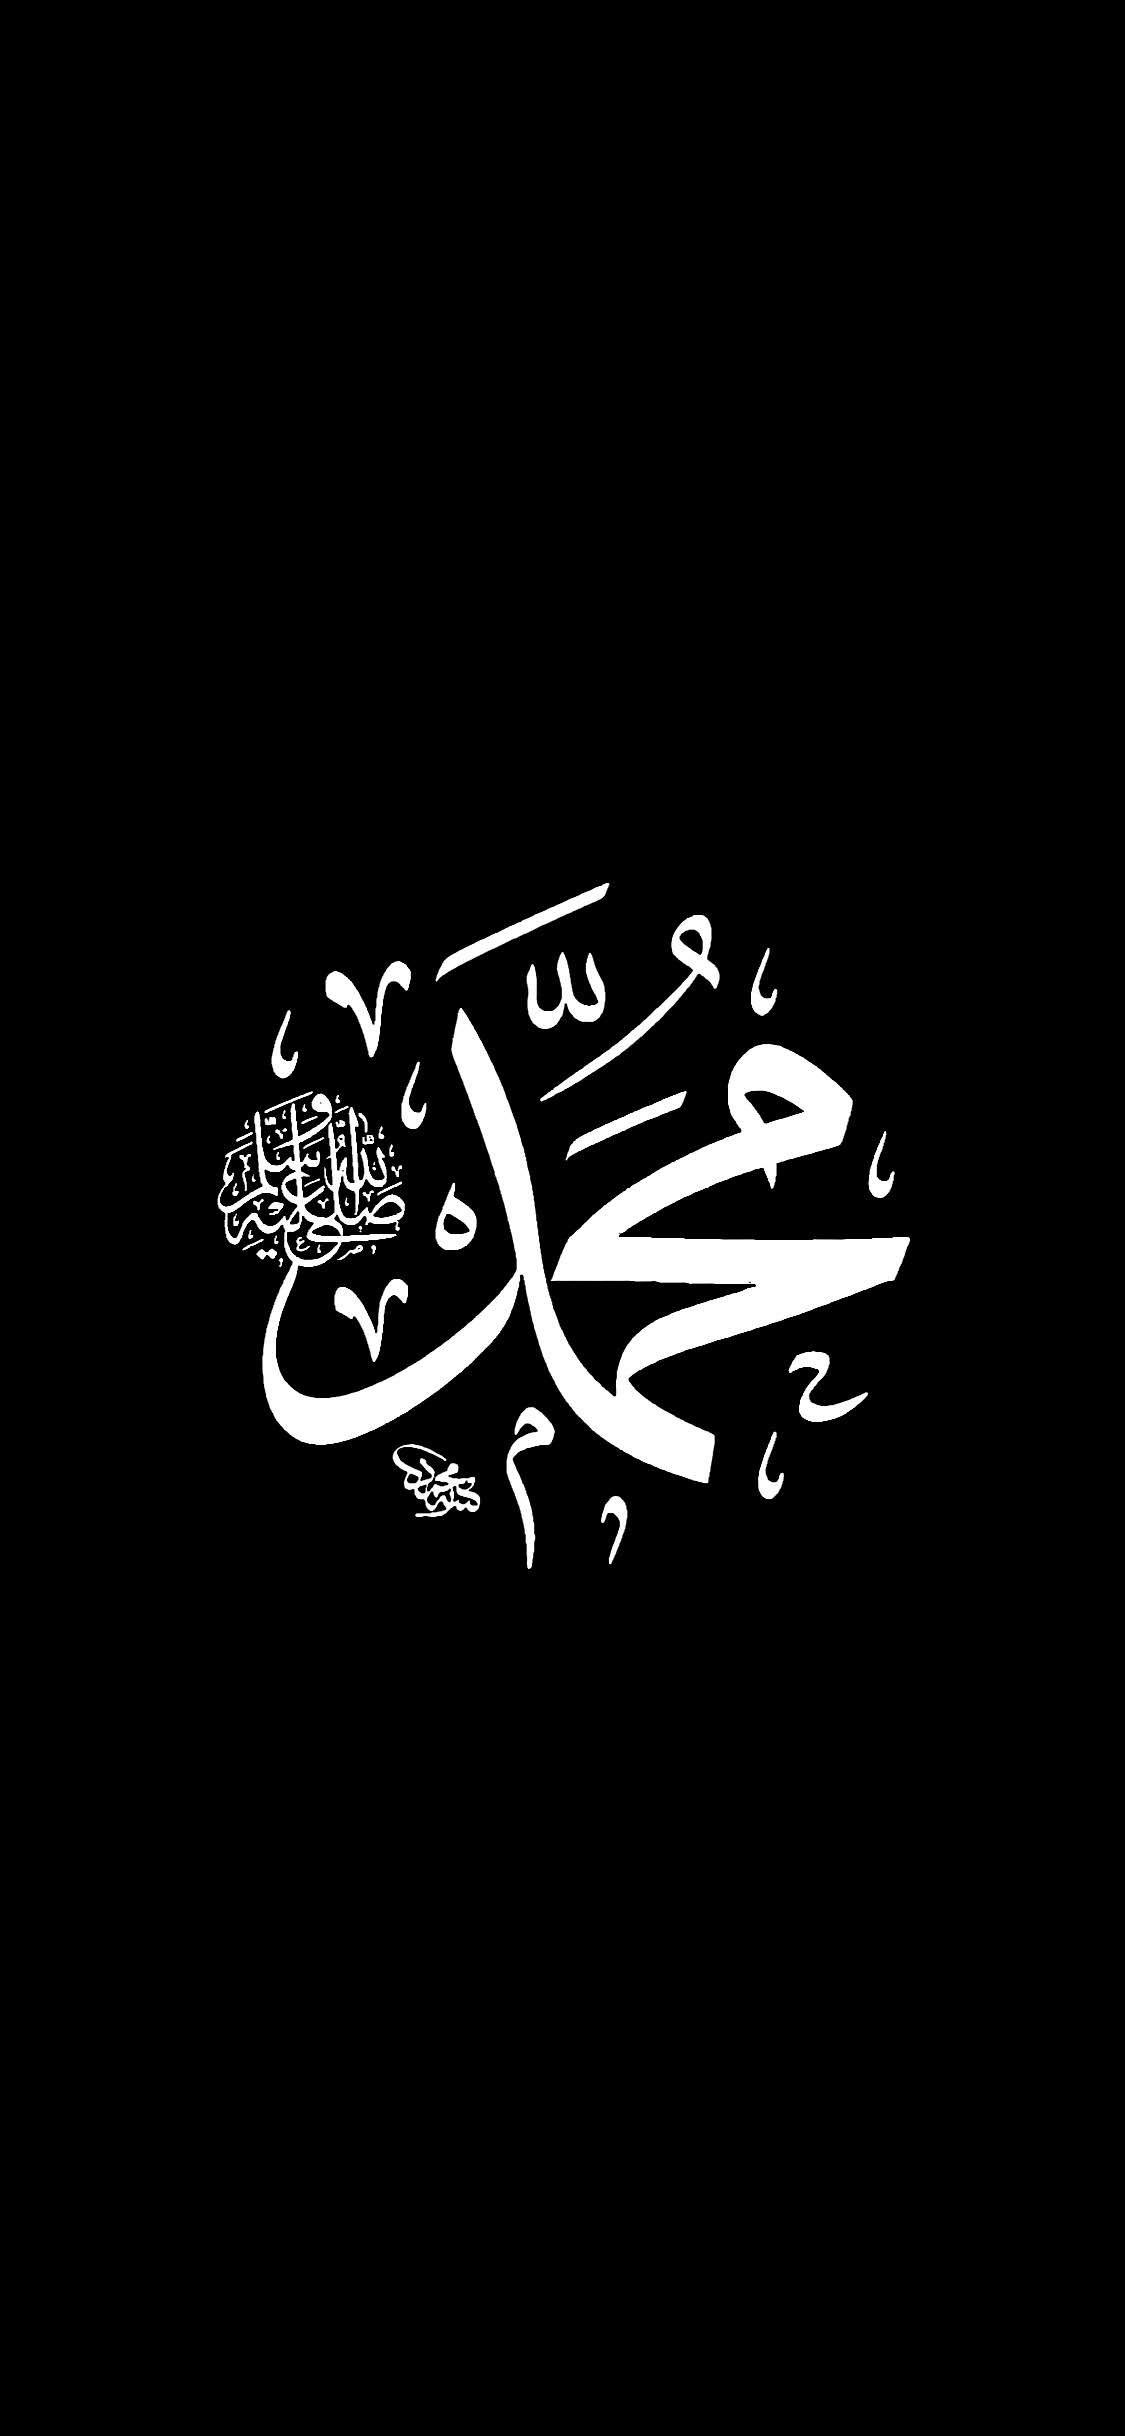 Muhammad Saw Wallpapers Top Free Muhammad Saw Backgrounds